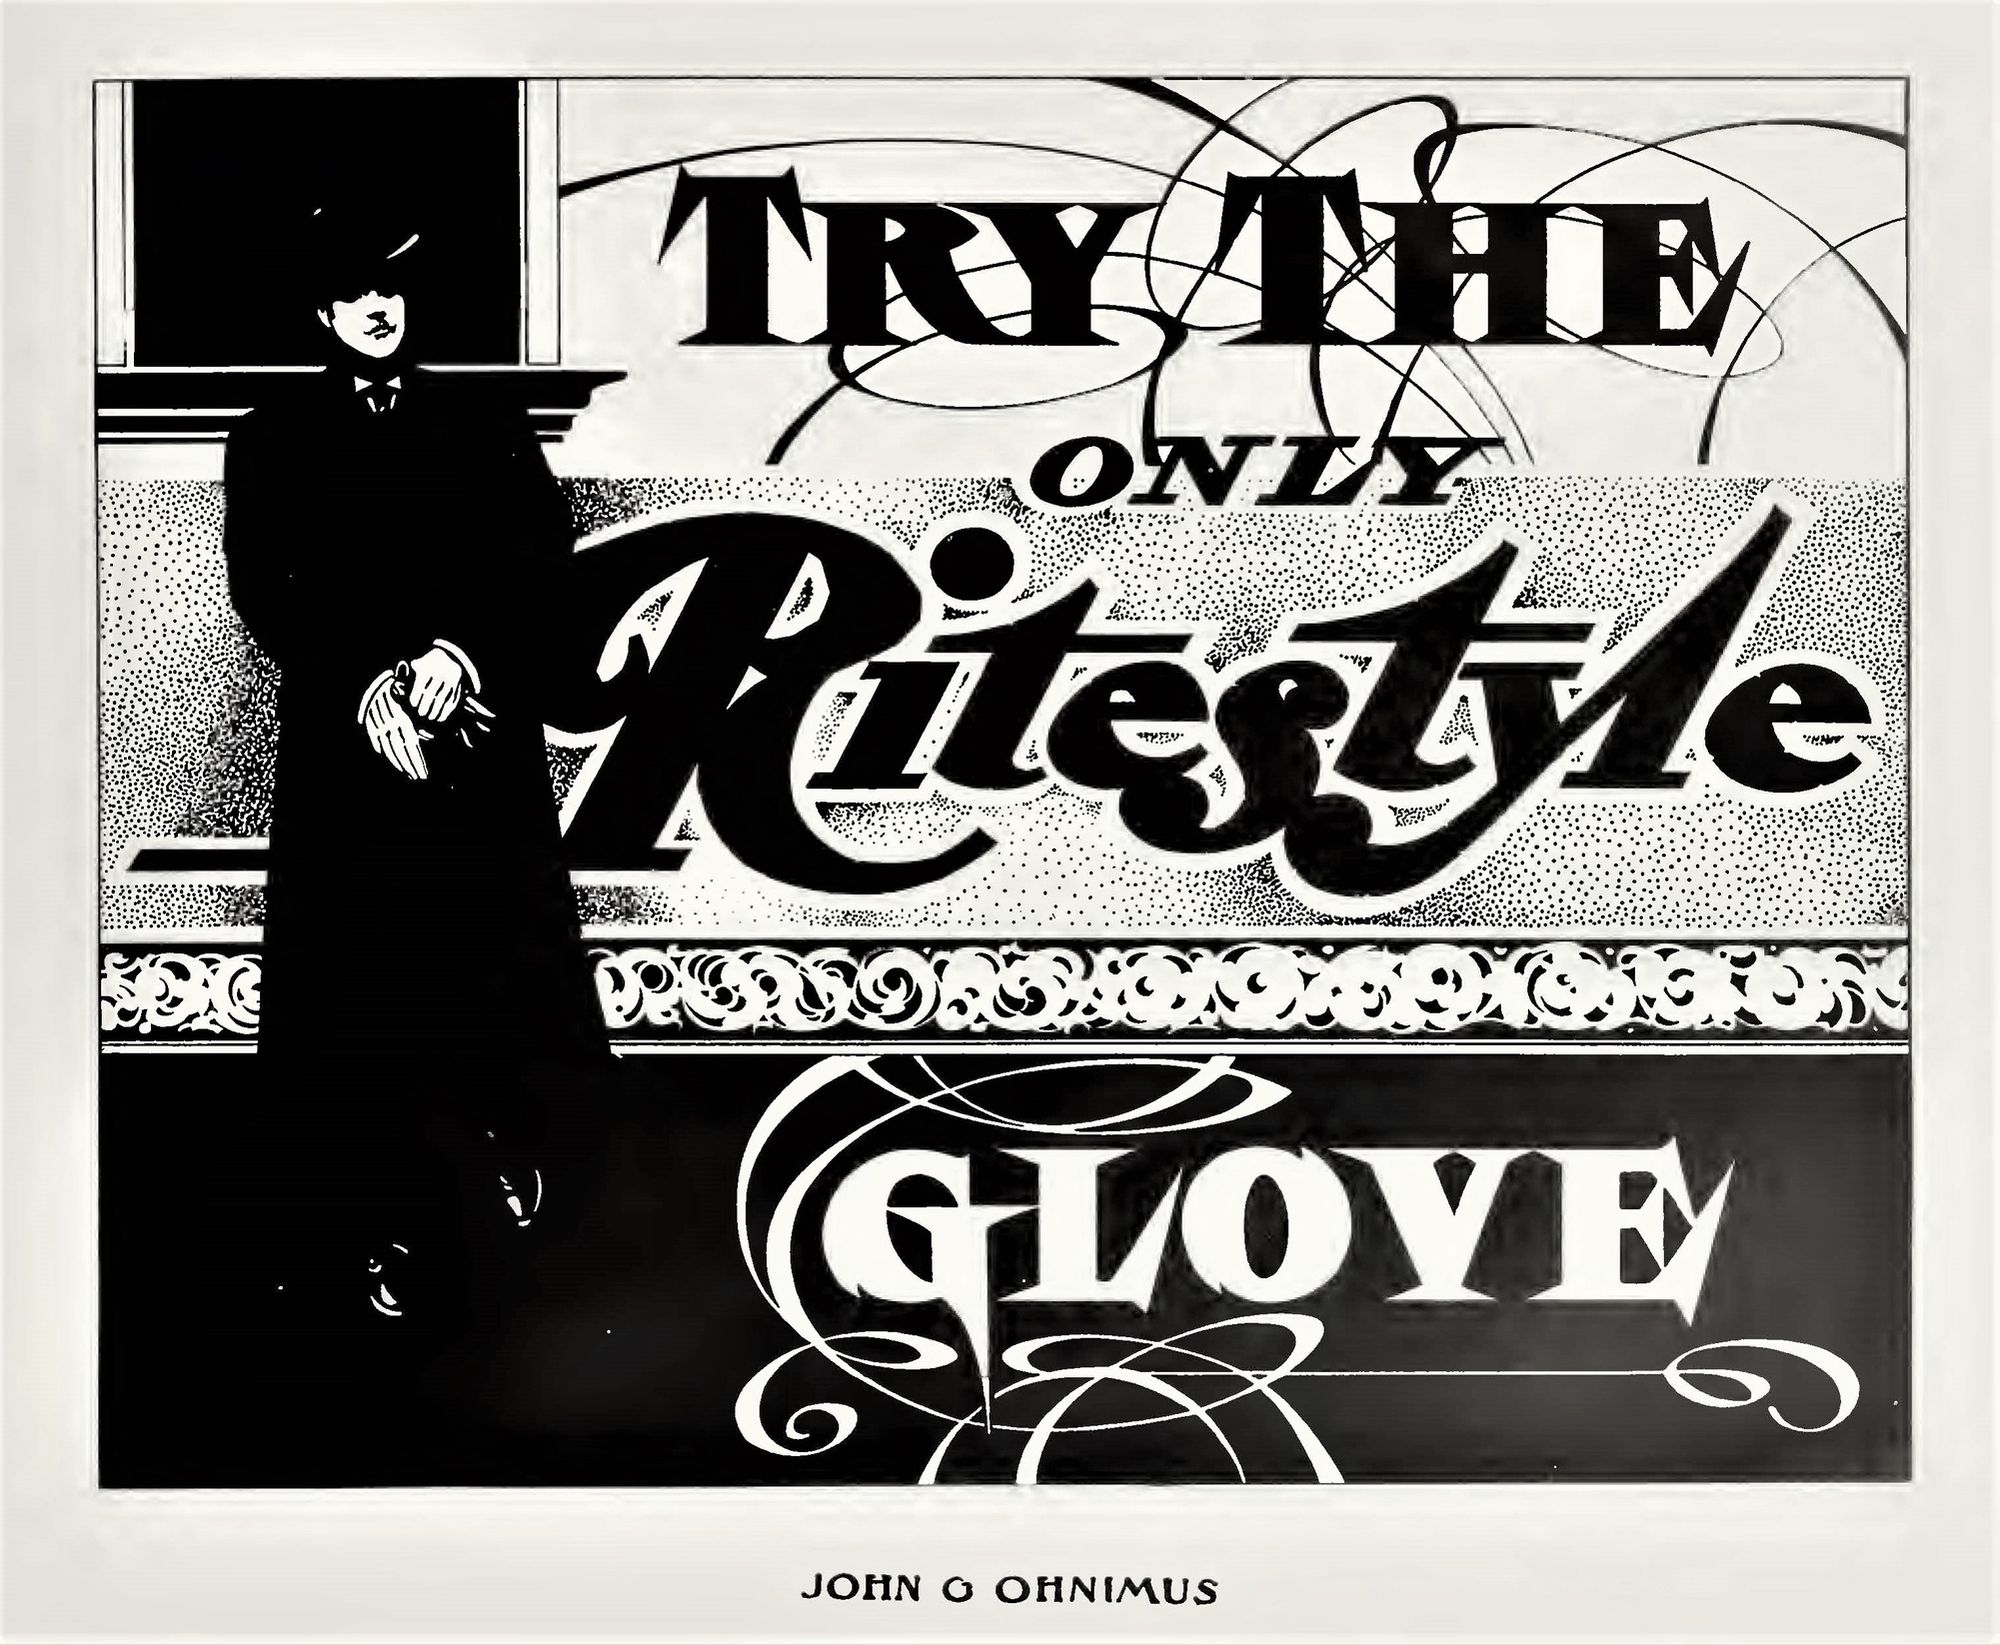 Black and white advertisement for Ritestyle Glove with hand-drawn pictorial and lettering.